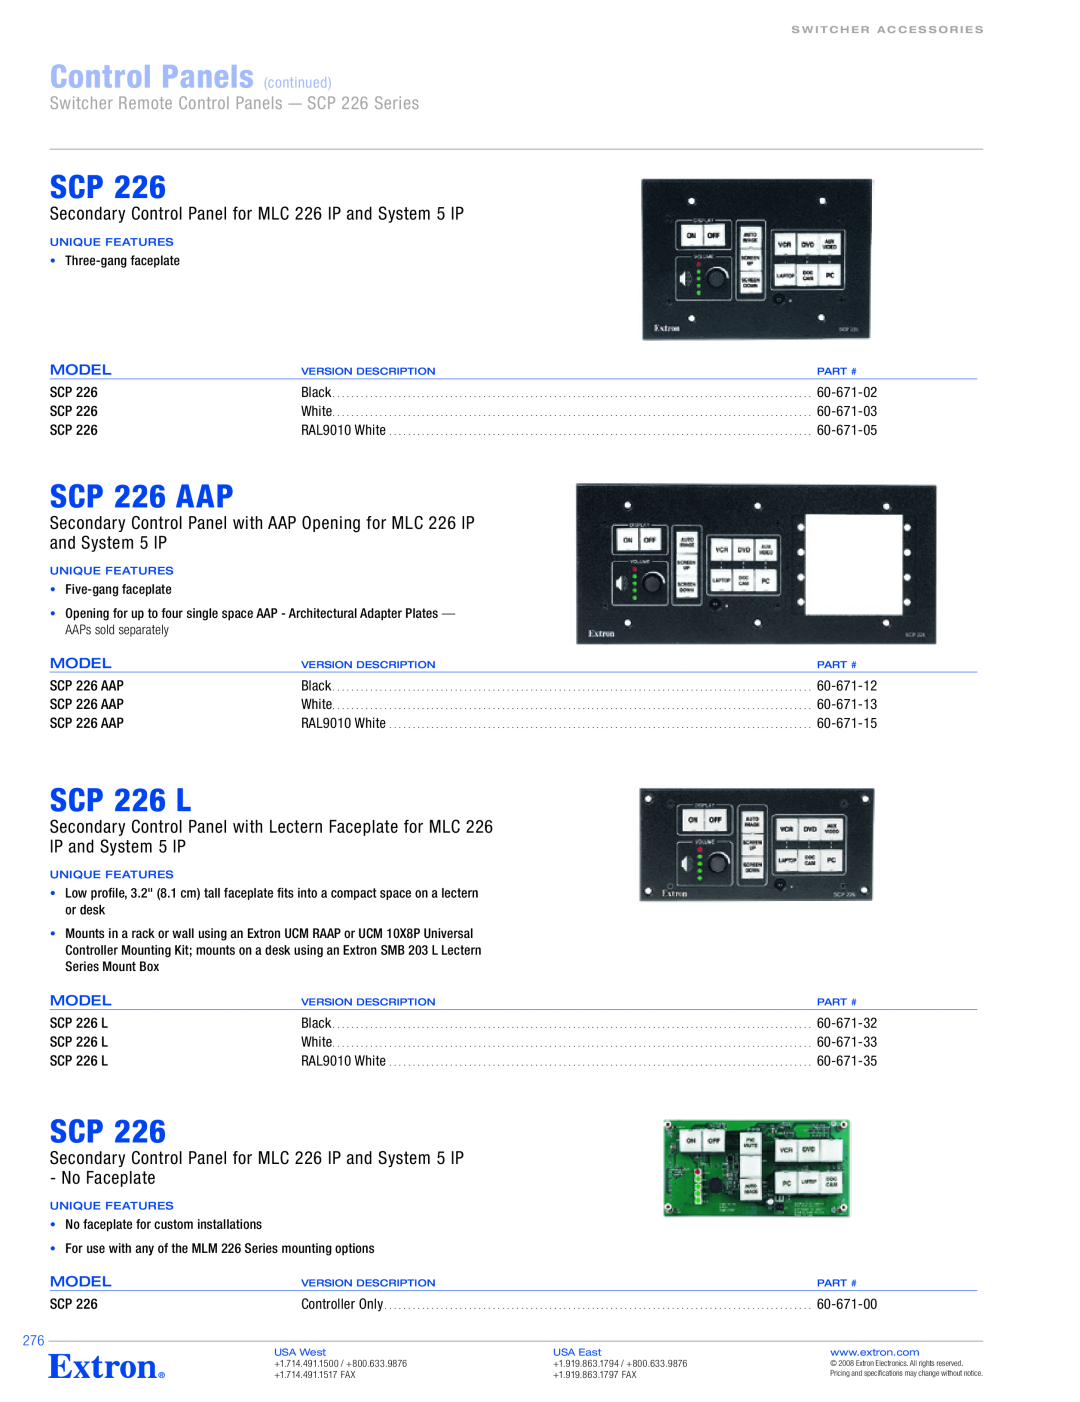 Extron electronic SCP 104 Series SCP 226 AAP, SCP 226 L, Secondary Control Panel for MLC 226 IP and System 5 IP, 60-671-00 